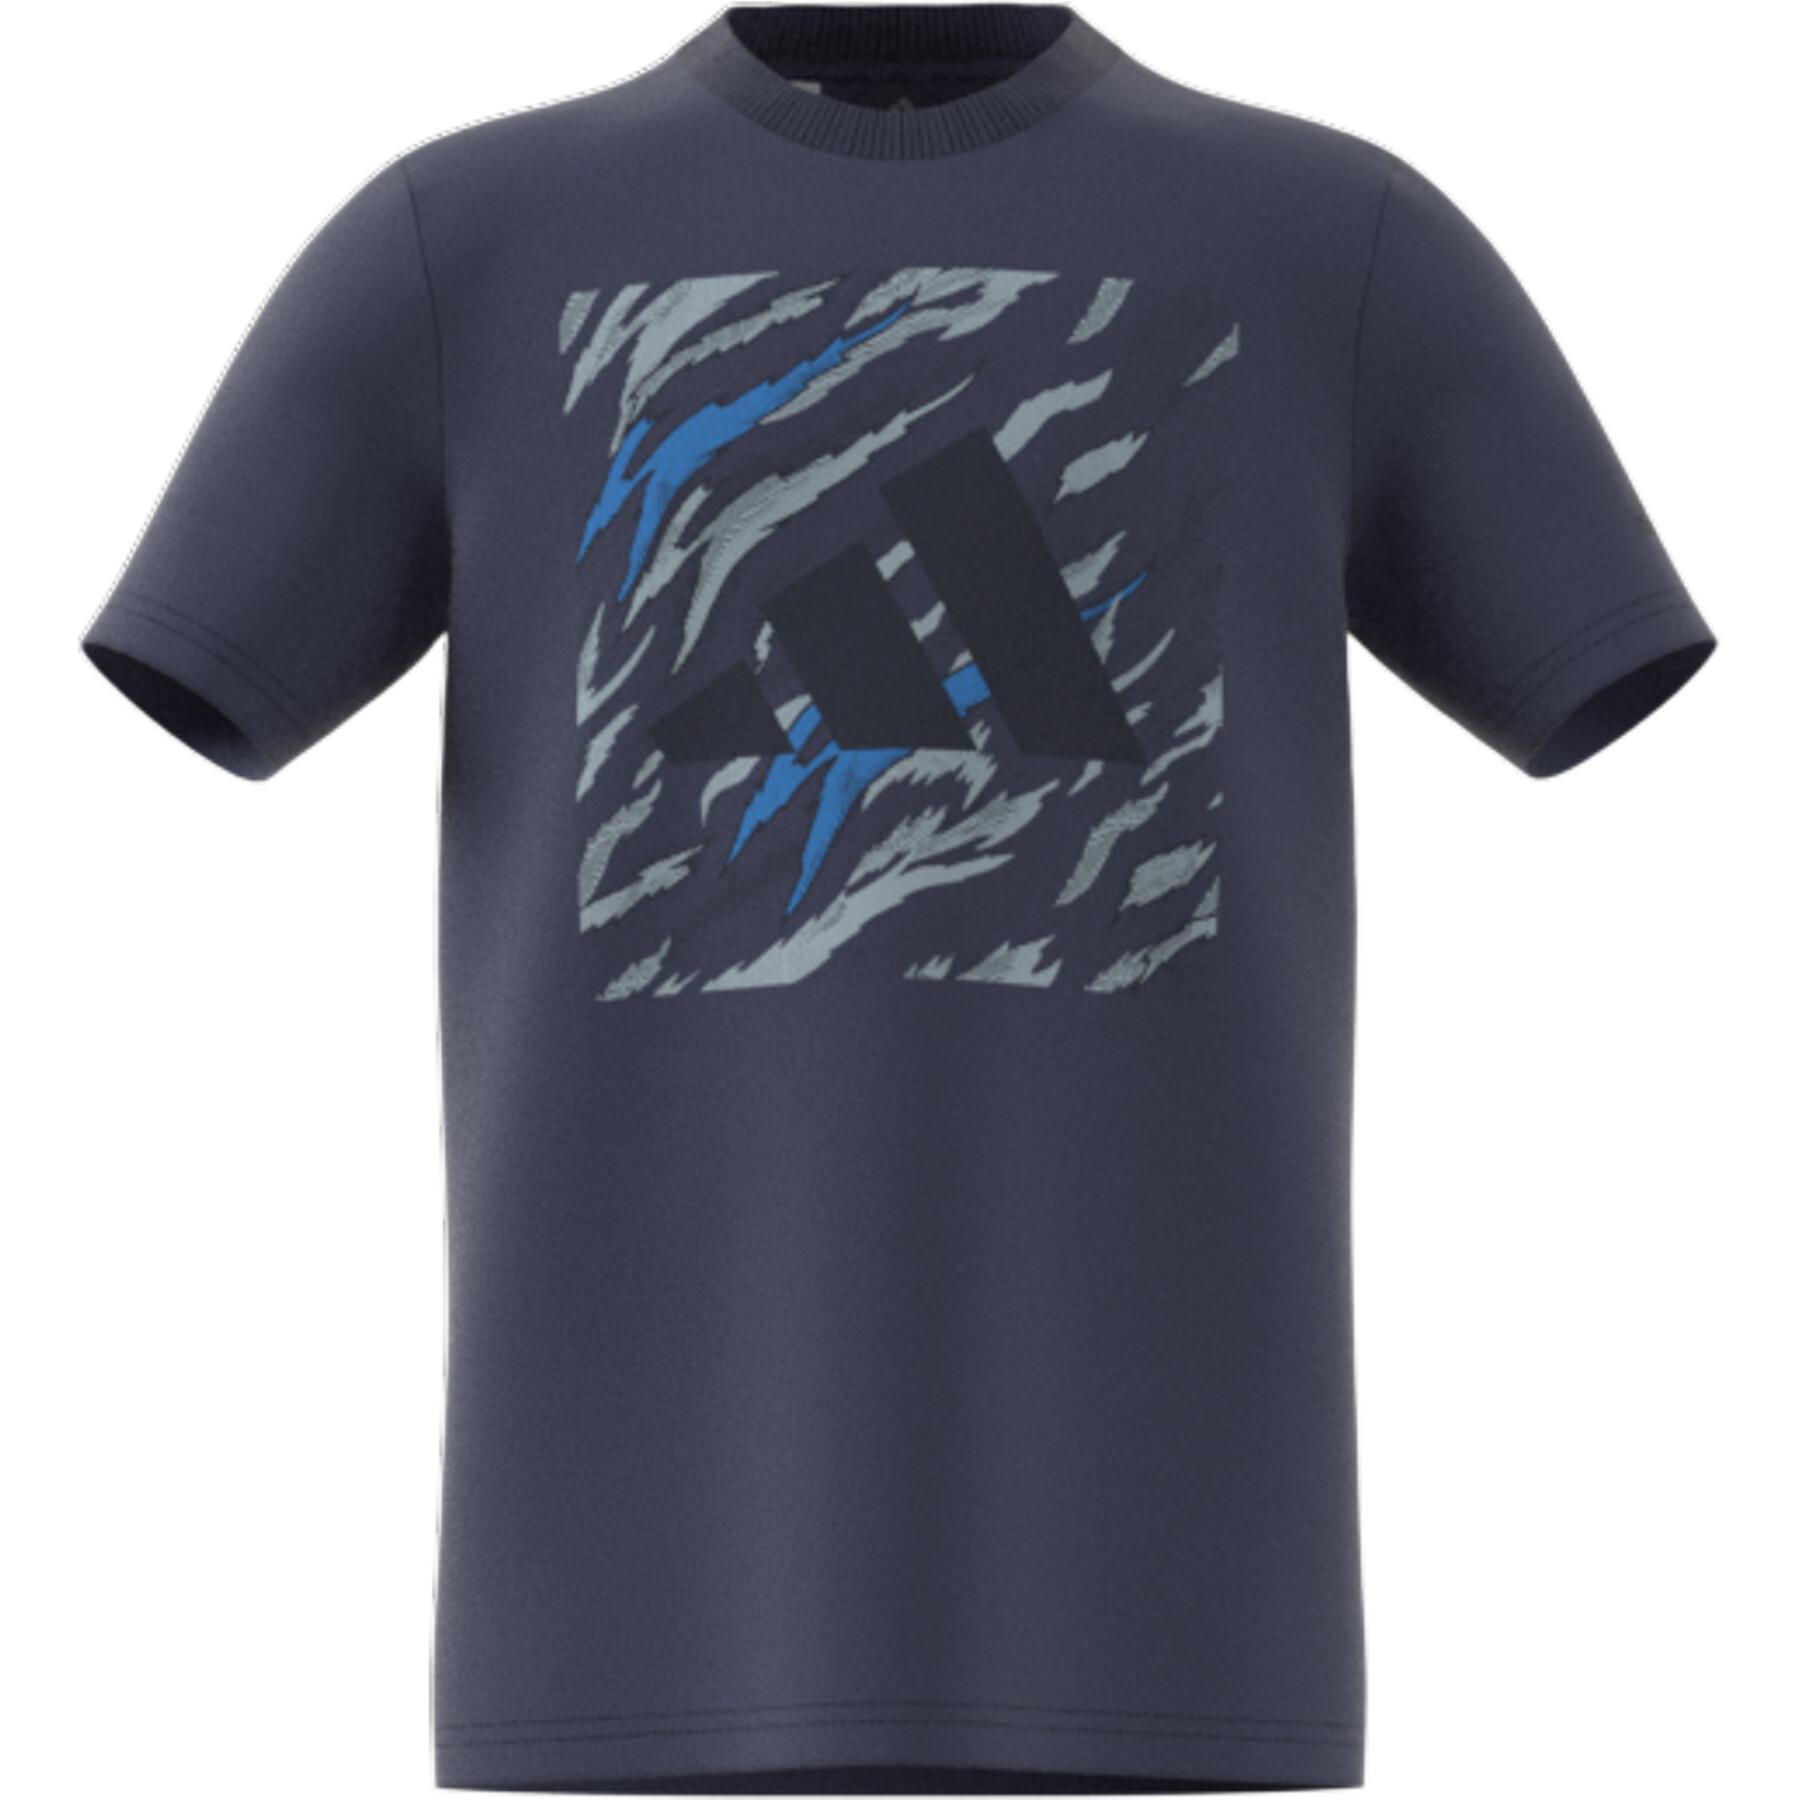 Child's T-shirt adidas Water Tiger Graphic